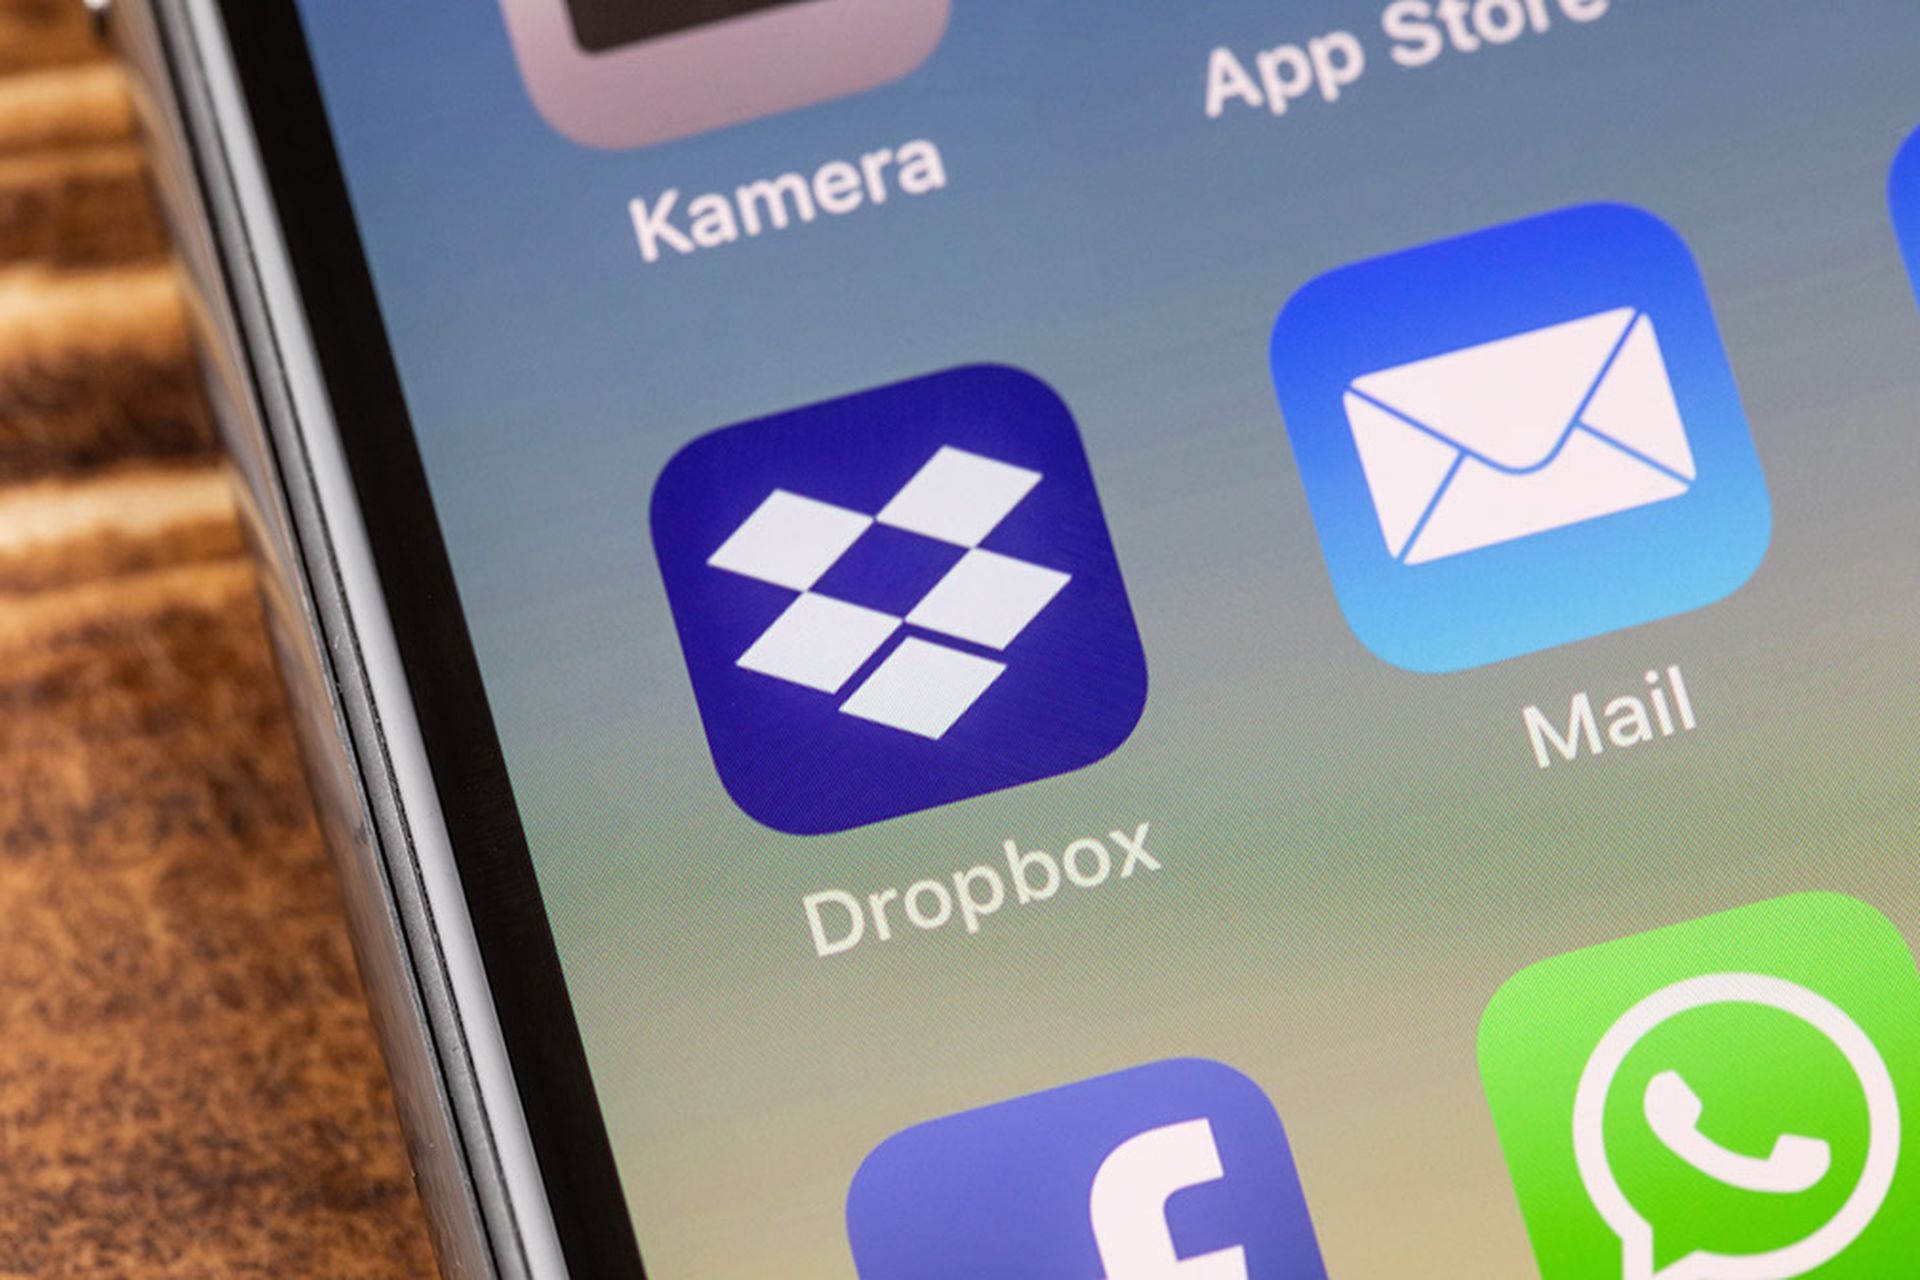 Close up to dropbox app on the screen of an iPhone X with personalized background